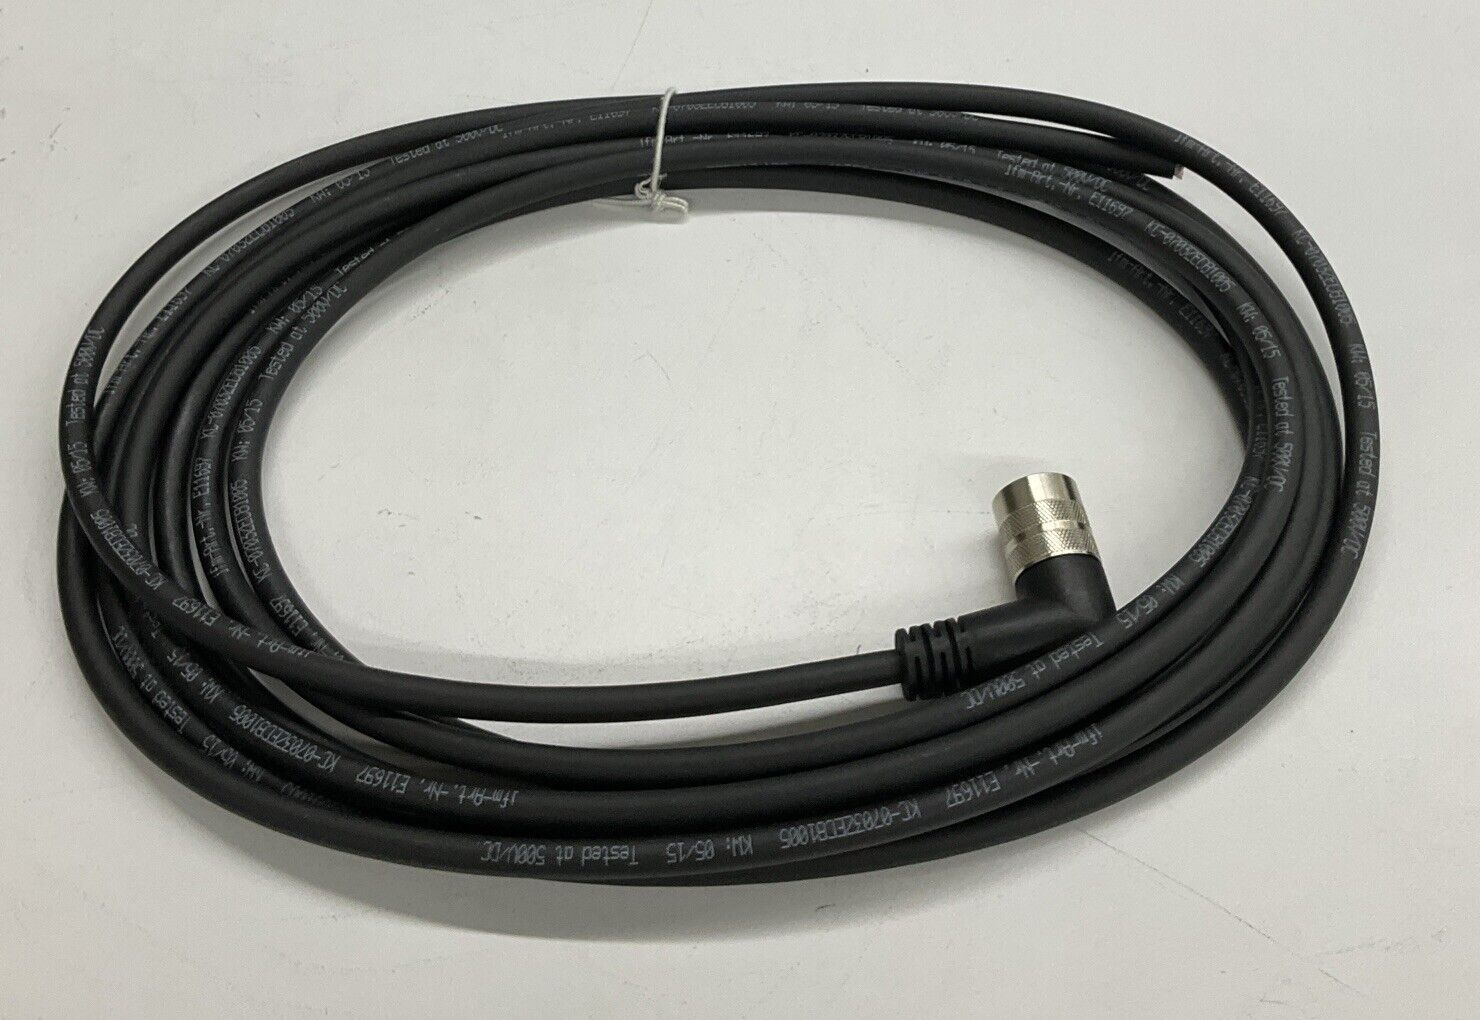 IFM Efector E11697 Single-End M16  90° Female PUR Cable 5 Meters (CBL104)